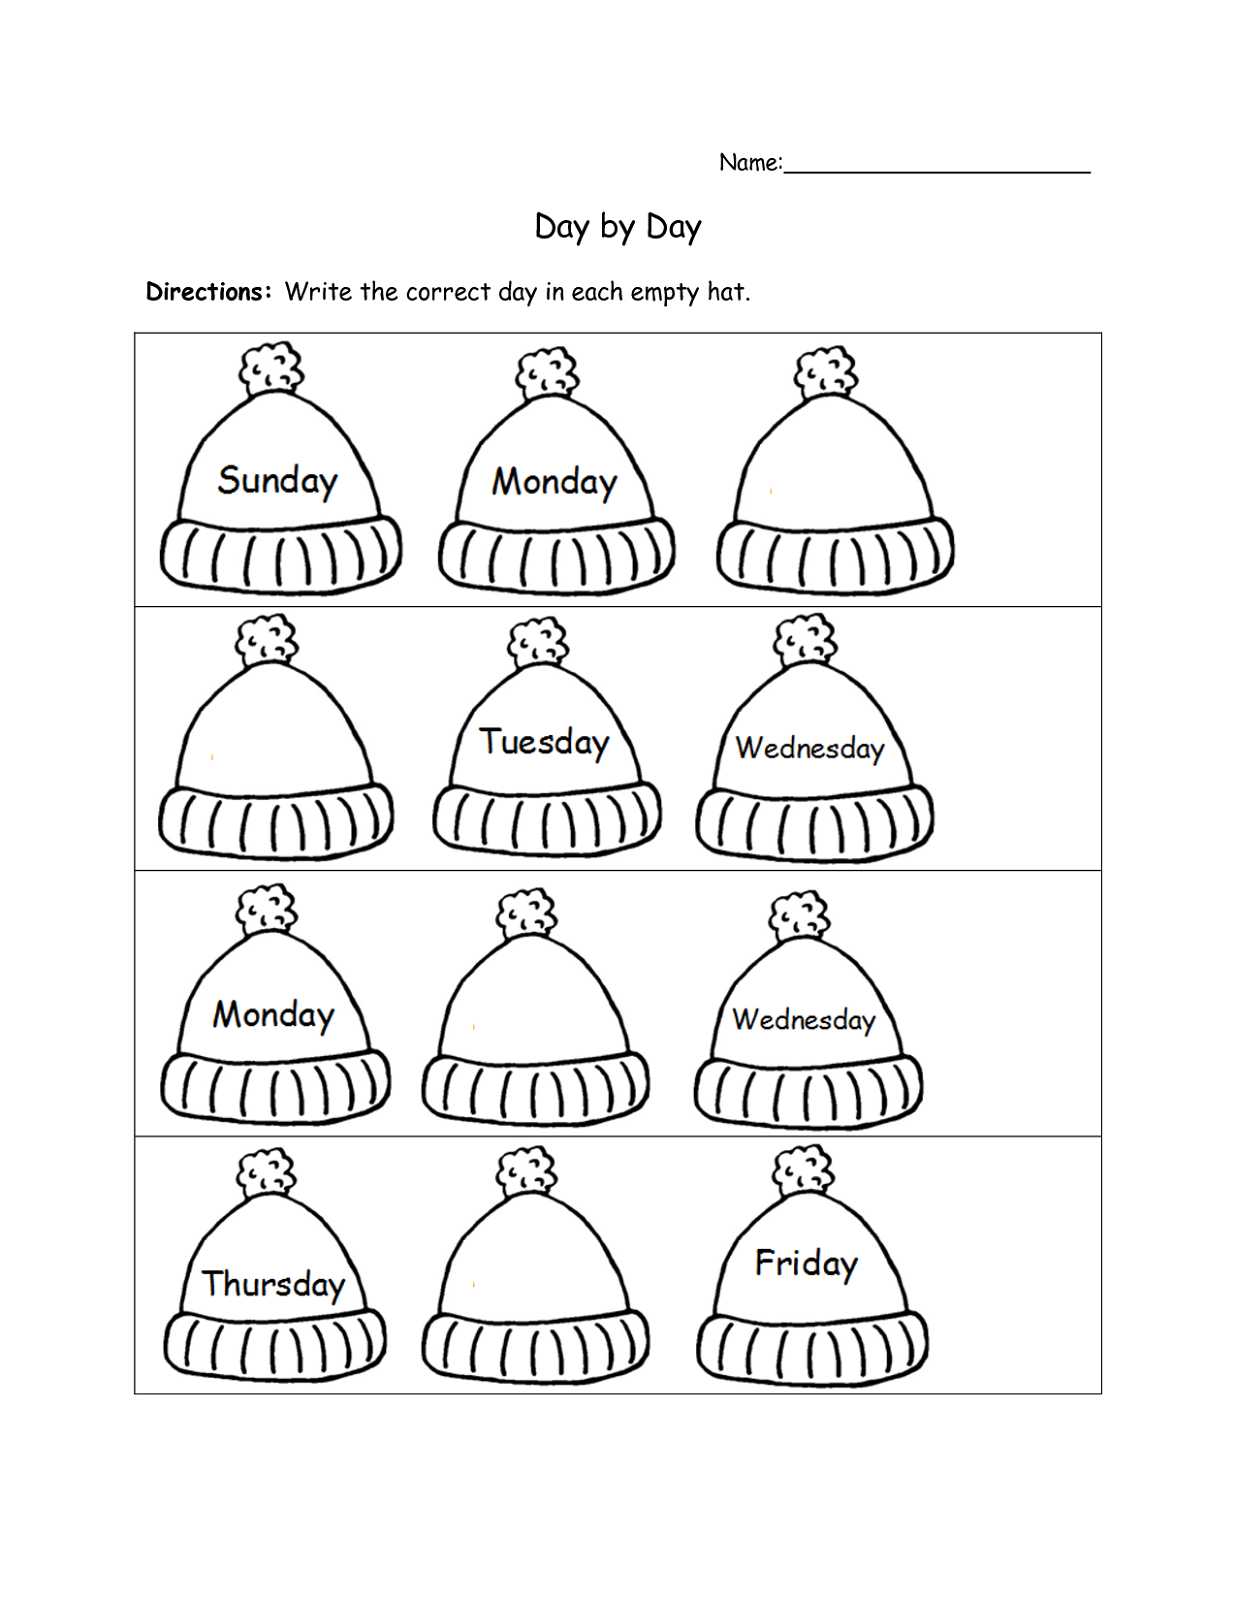 The Law Of Sines Worksheet with Collection Of Days Of the Week Kinder Worksheets